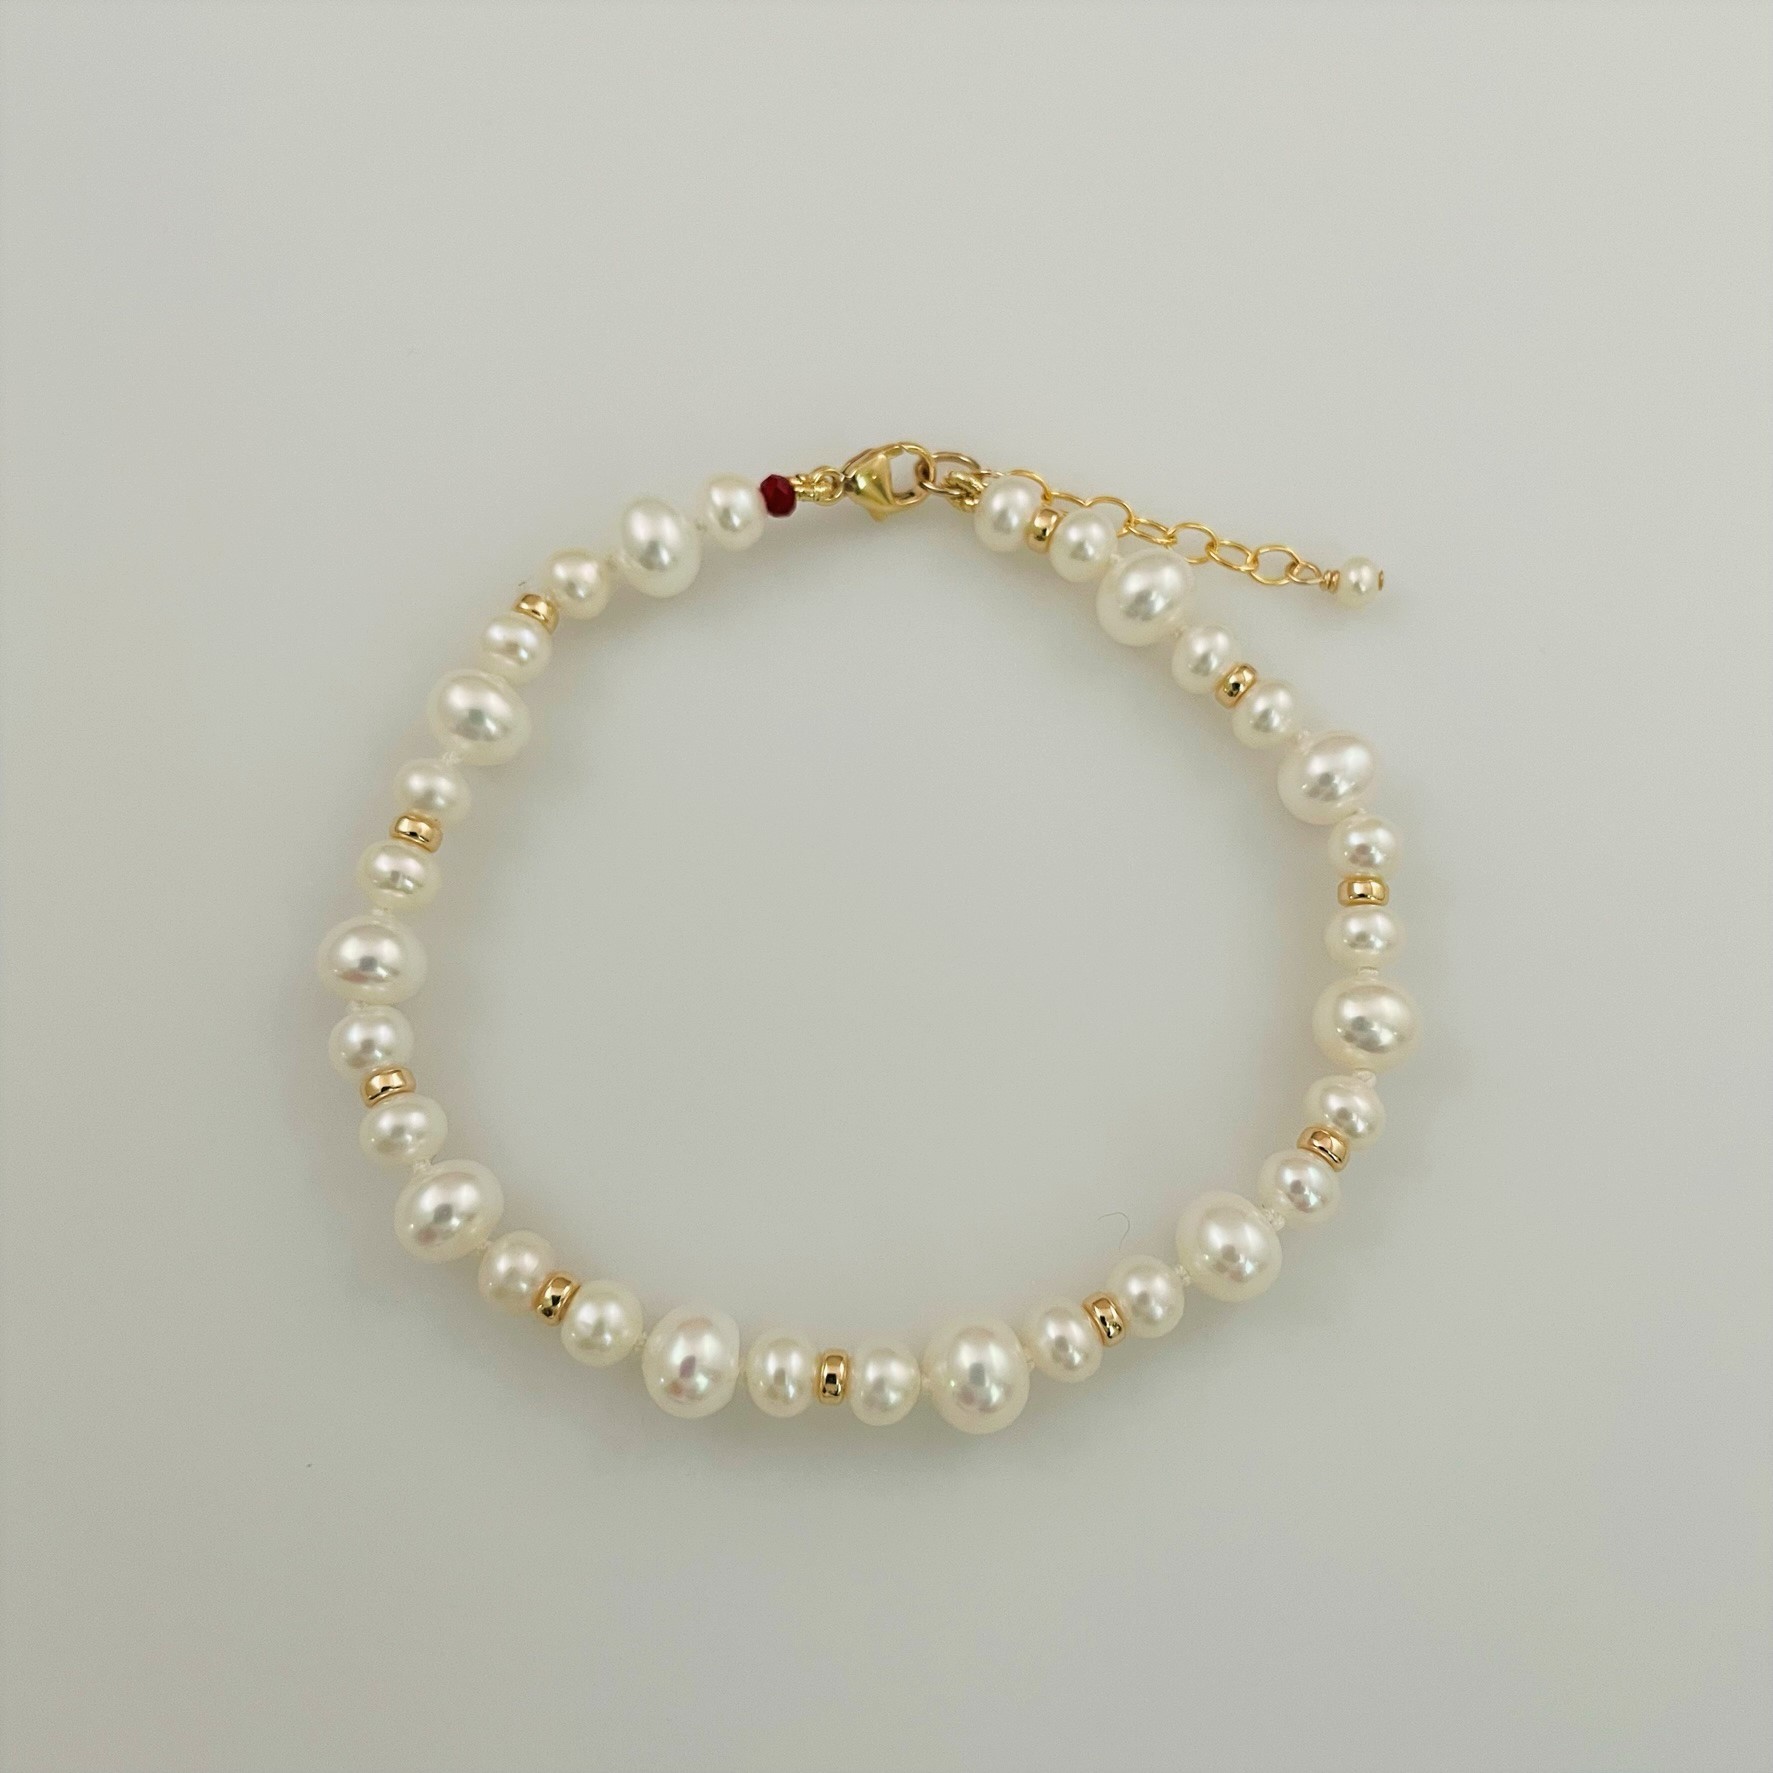 Dainty Pearl and Gold Bracelet B550 – Nantucket Pearl Company